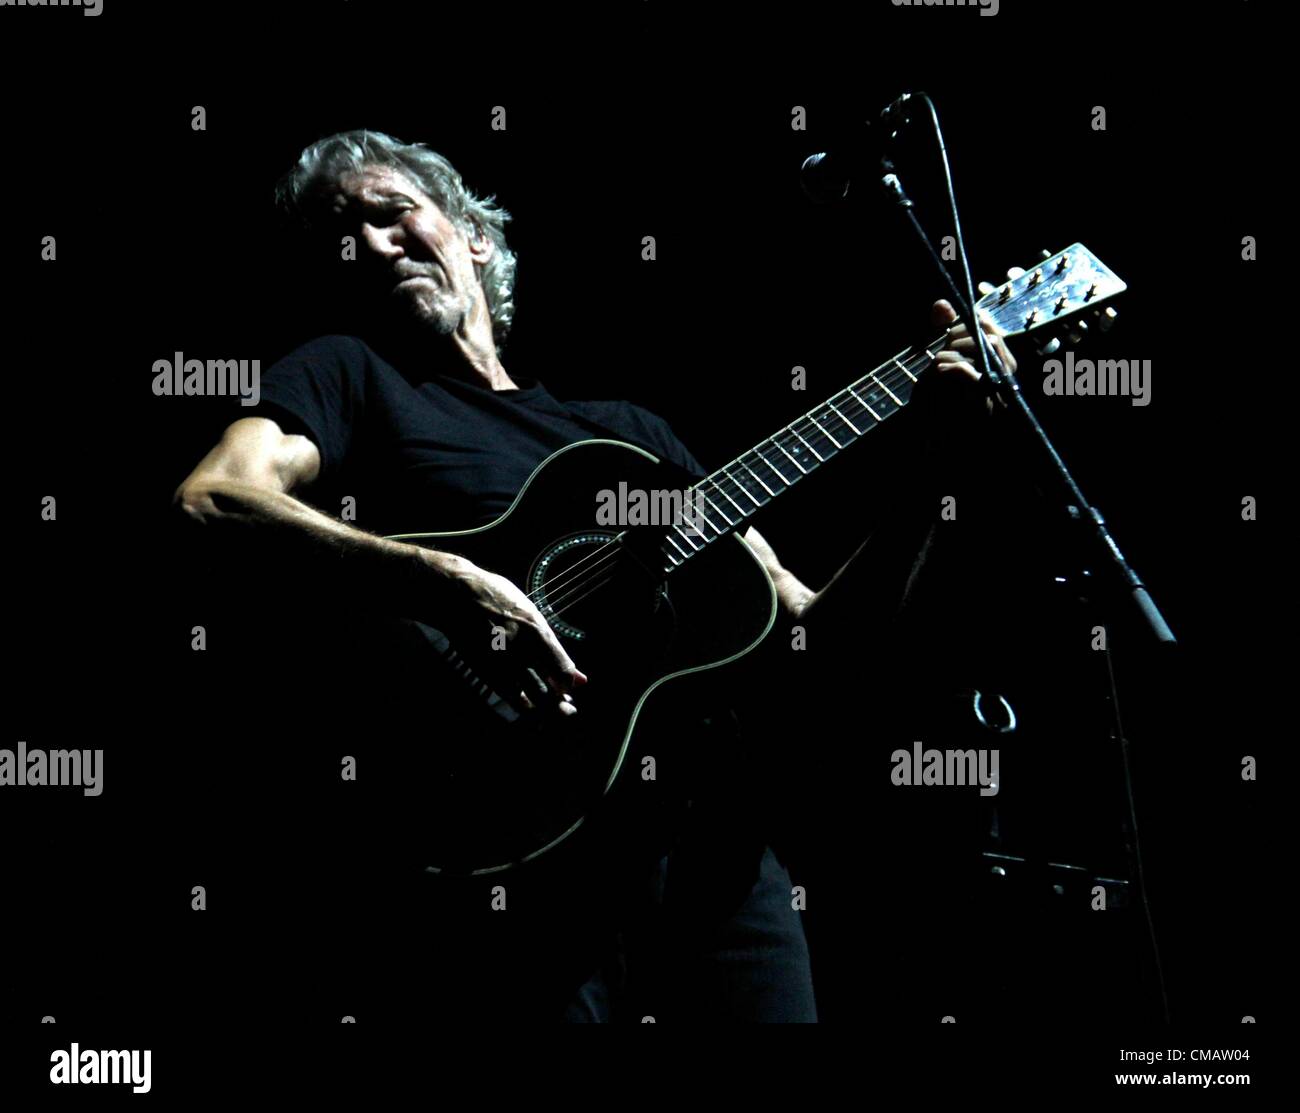 Roger Waters on stage for Roger Waters THE WALL LIVE Concert Tour, Yankee Stadium, New York, NY July 6, 2012. Photo By: F. Burton Patrick/Everett Collection Stock Photo